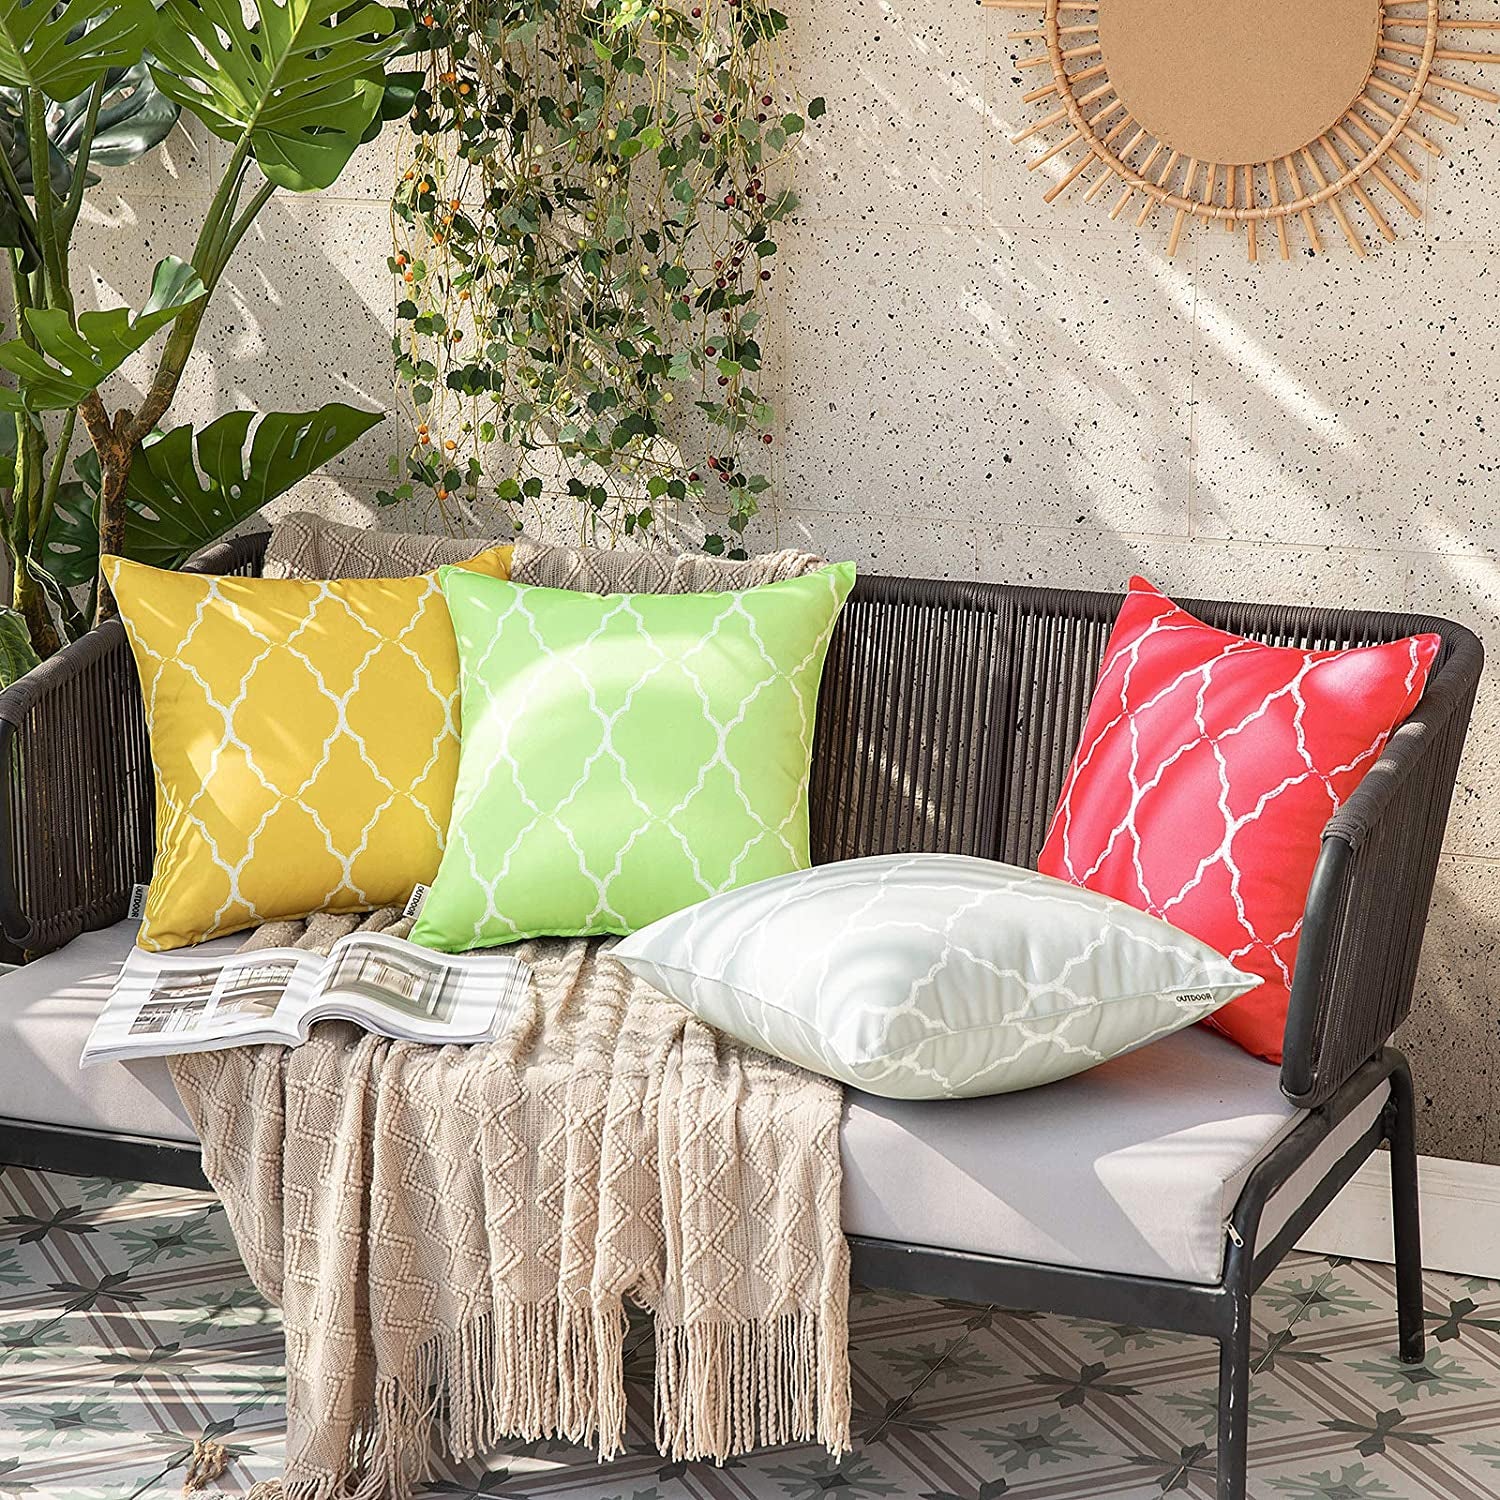 Pack of 2 Outdoor Waterproof Pillow Covers Morocco Geometric Pillowcases Decorative Cushion Cases Zipper for Patio Garden Living Room Bedroom Couch Sofa 18X18 Inch, Yellow